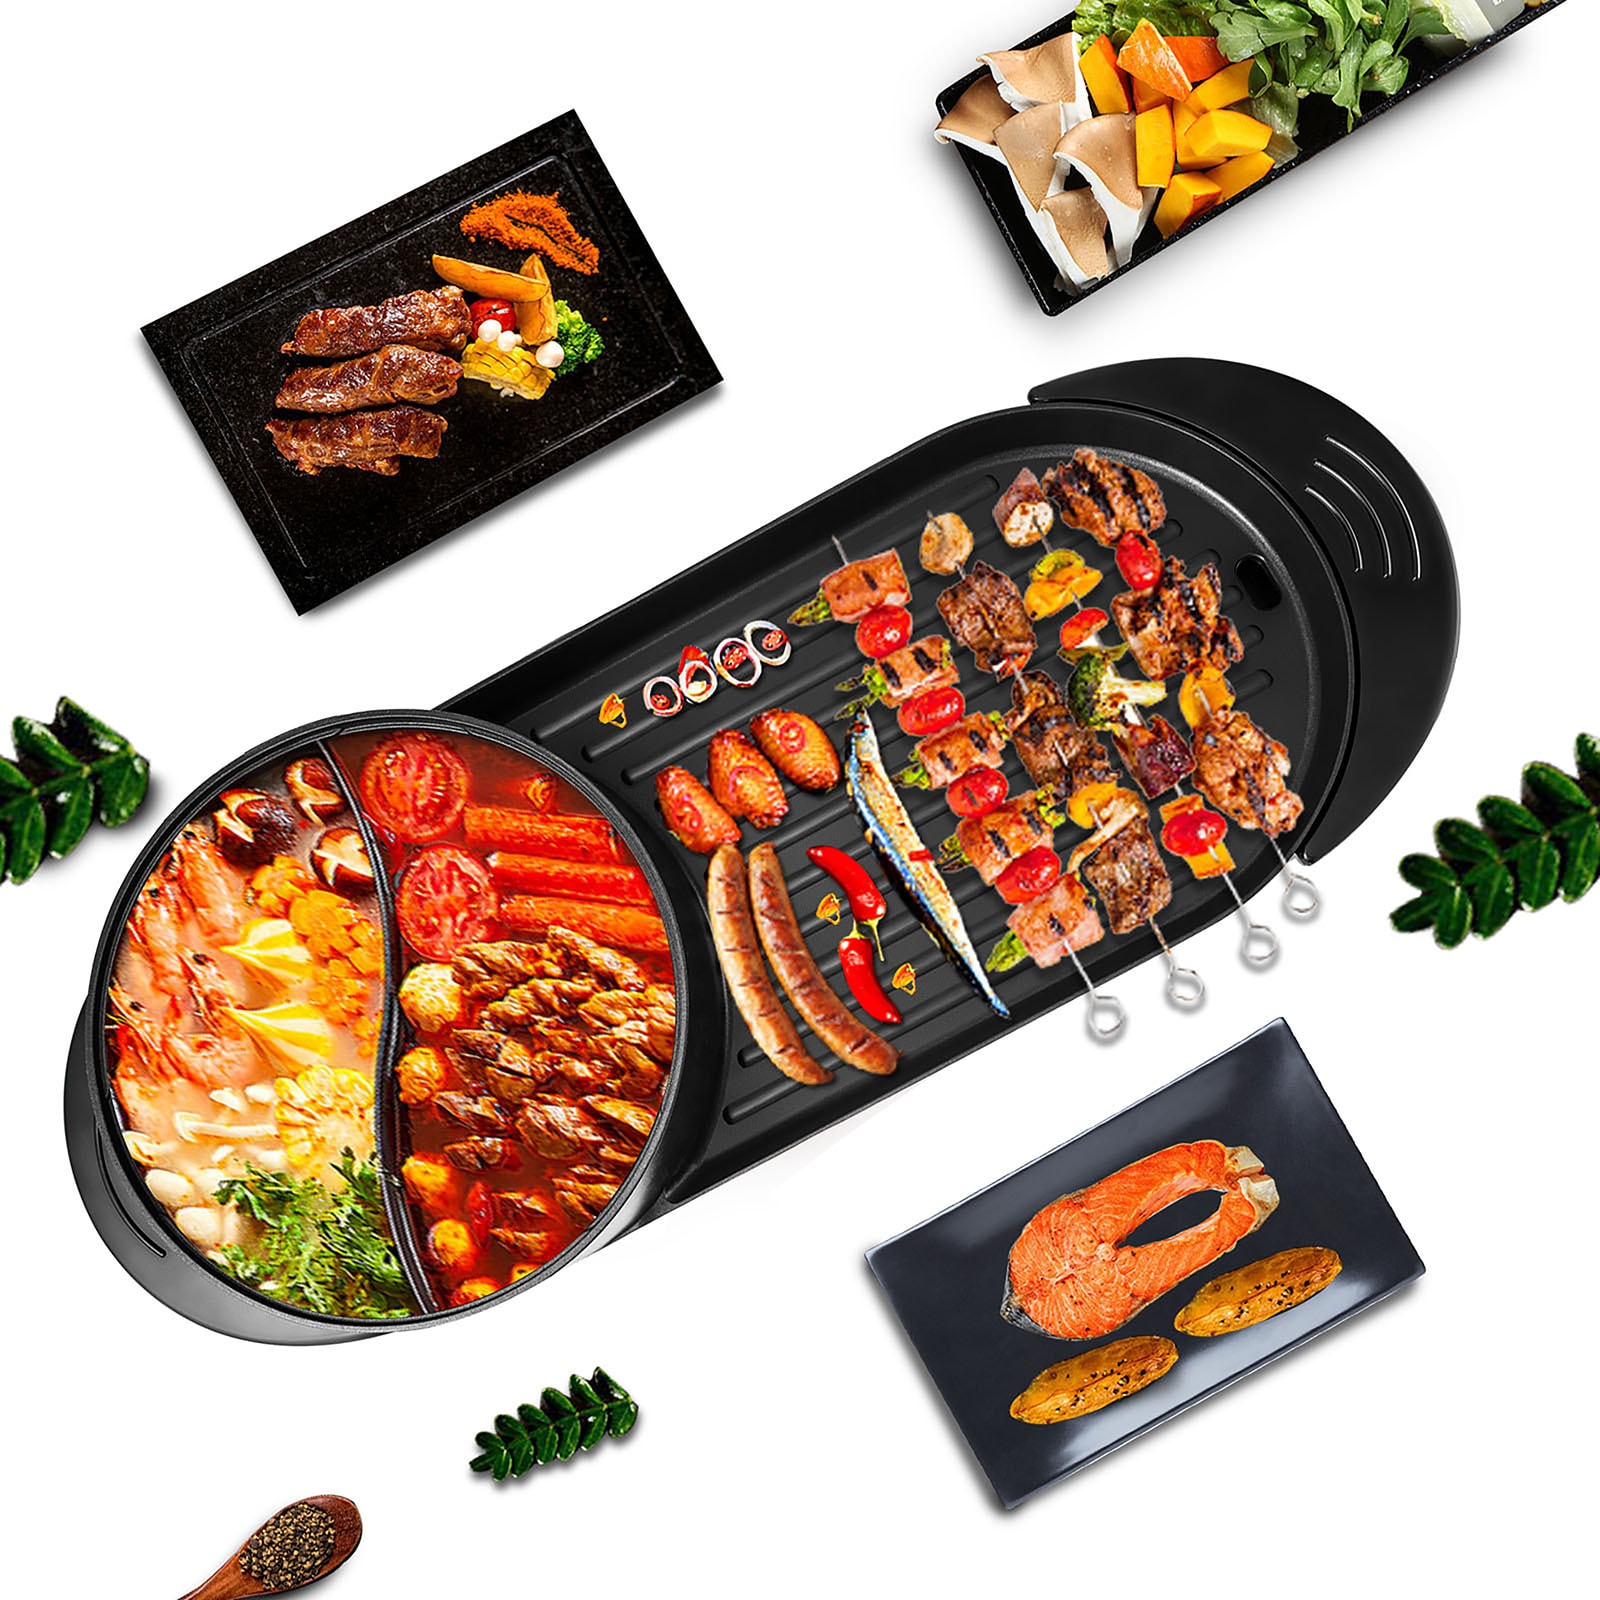 VEVOR 2 in 1 Electric BBQ Pan Grill Hot Pot Portable Hot Pot BBQ Grill 2200W FTSS2200W110VHHAWV1